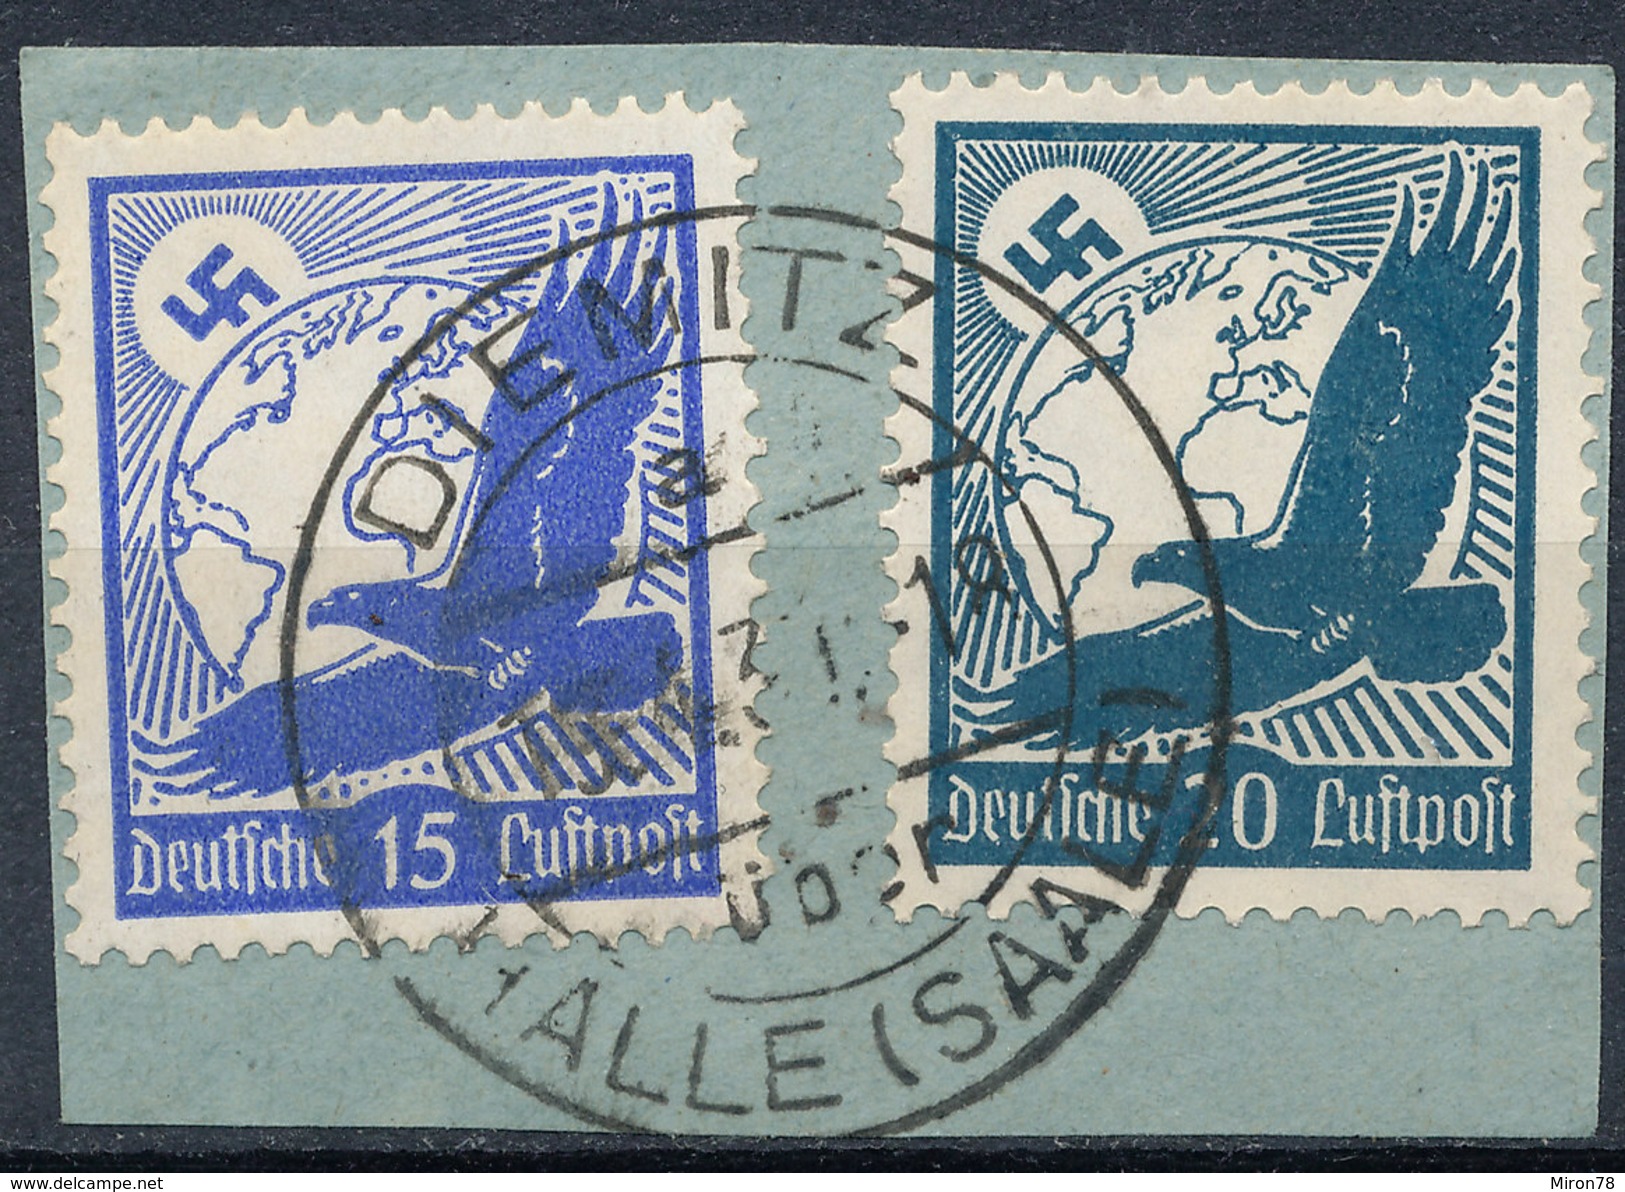 Stamp Germany Airmail Zeppelin 1934 Used Lot#27 - Airmail & Zeppelin